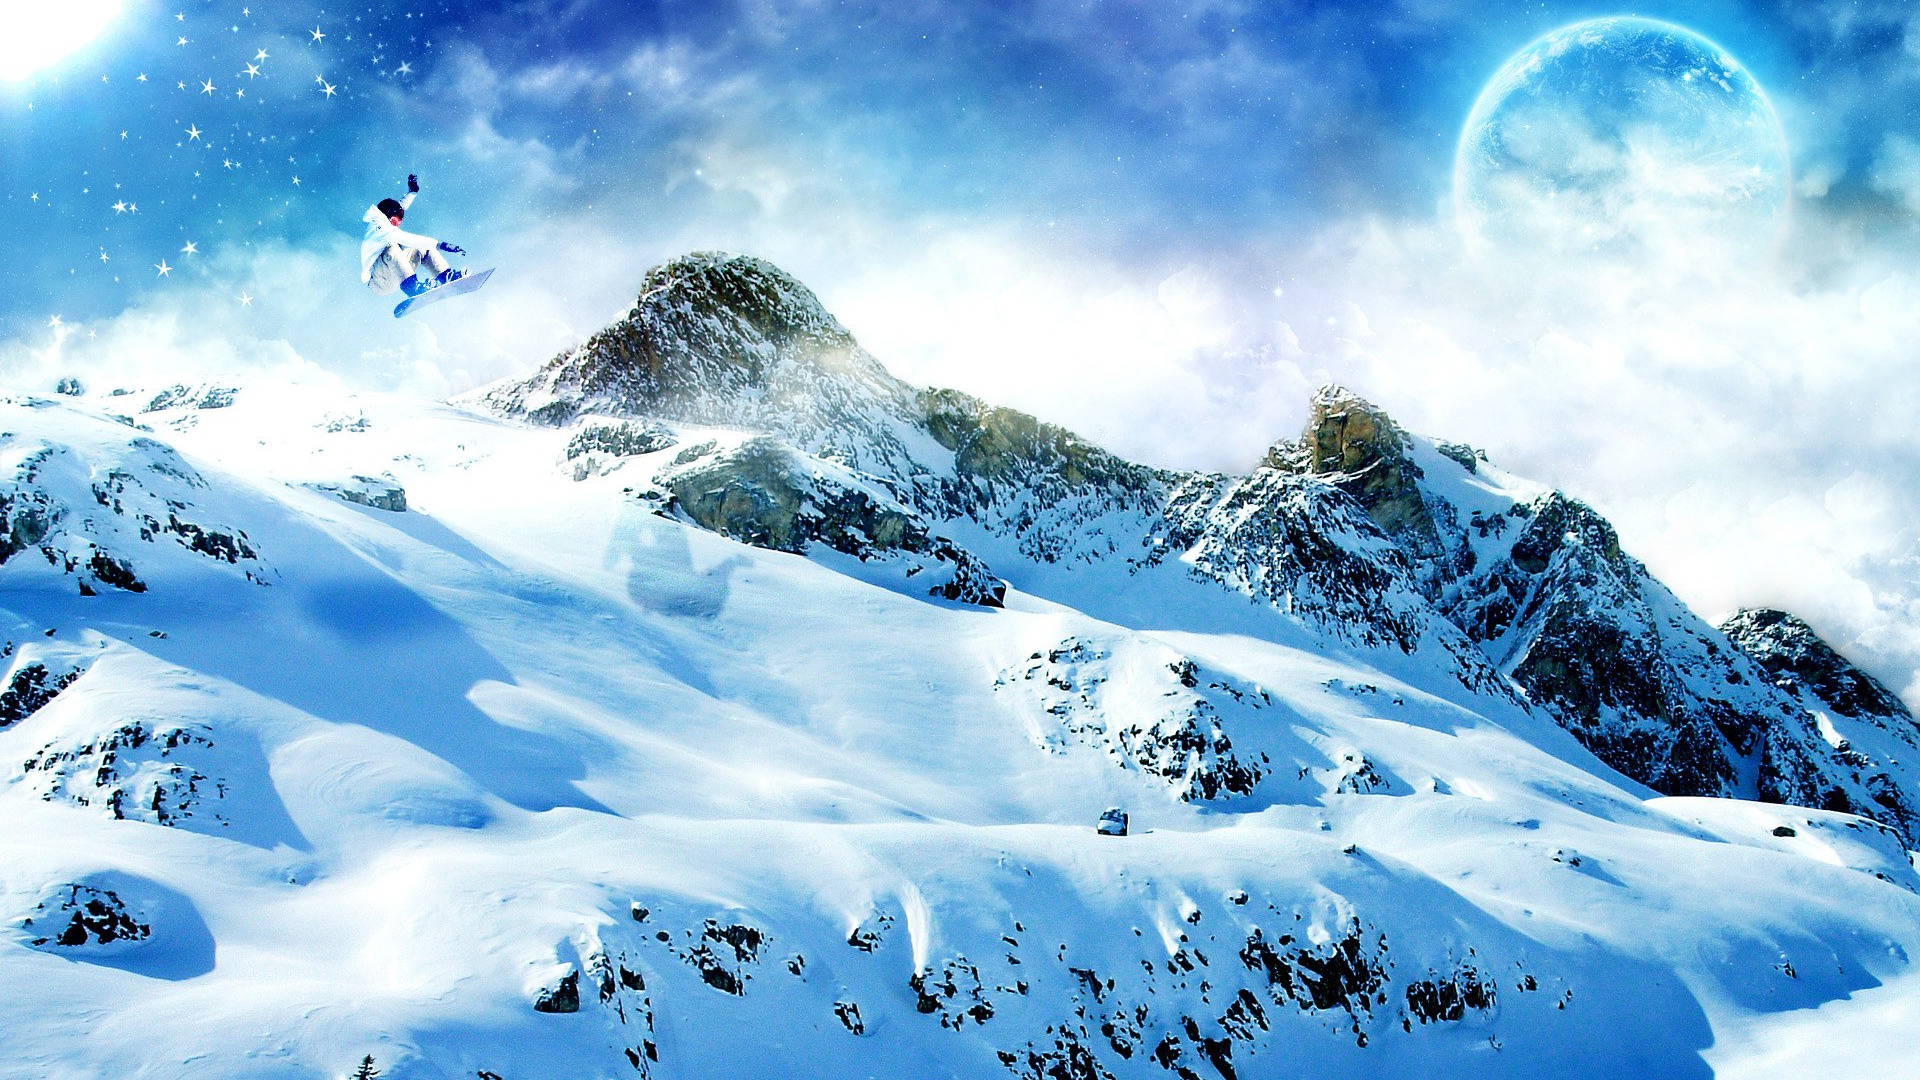 Planet over snowy mountains wallpaper 7570